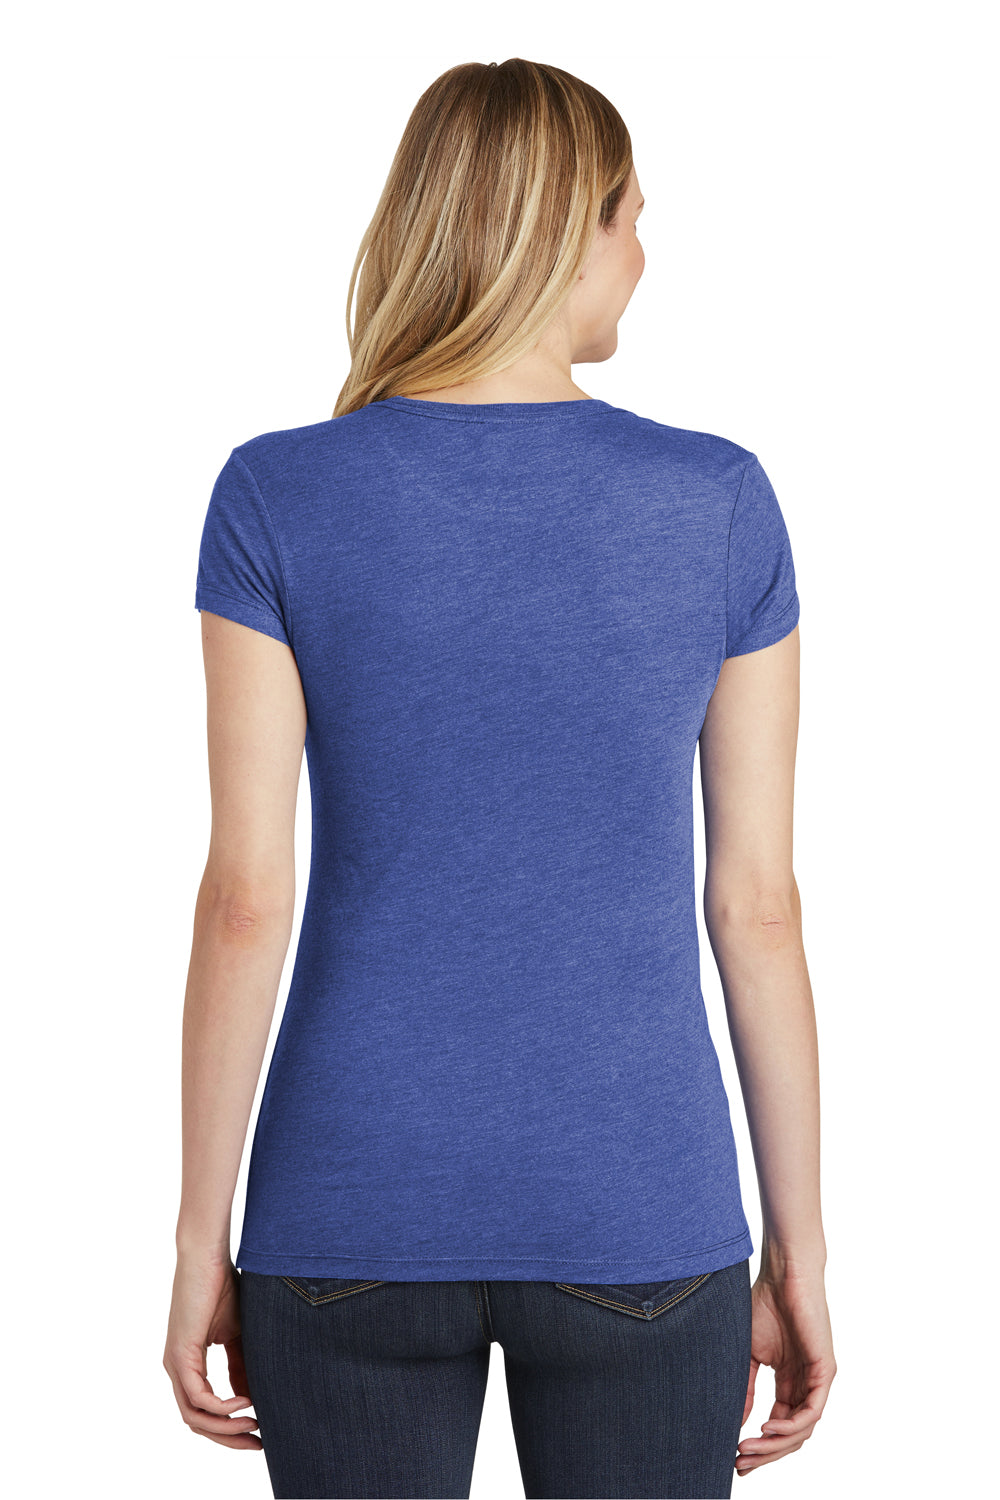 District DT155 Womens Fitted Perfect Tri Short Sleeve Crewneck T-Shirt Royal Blue Back